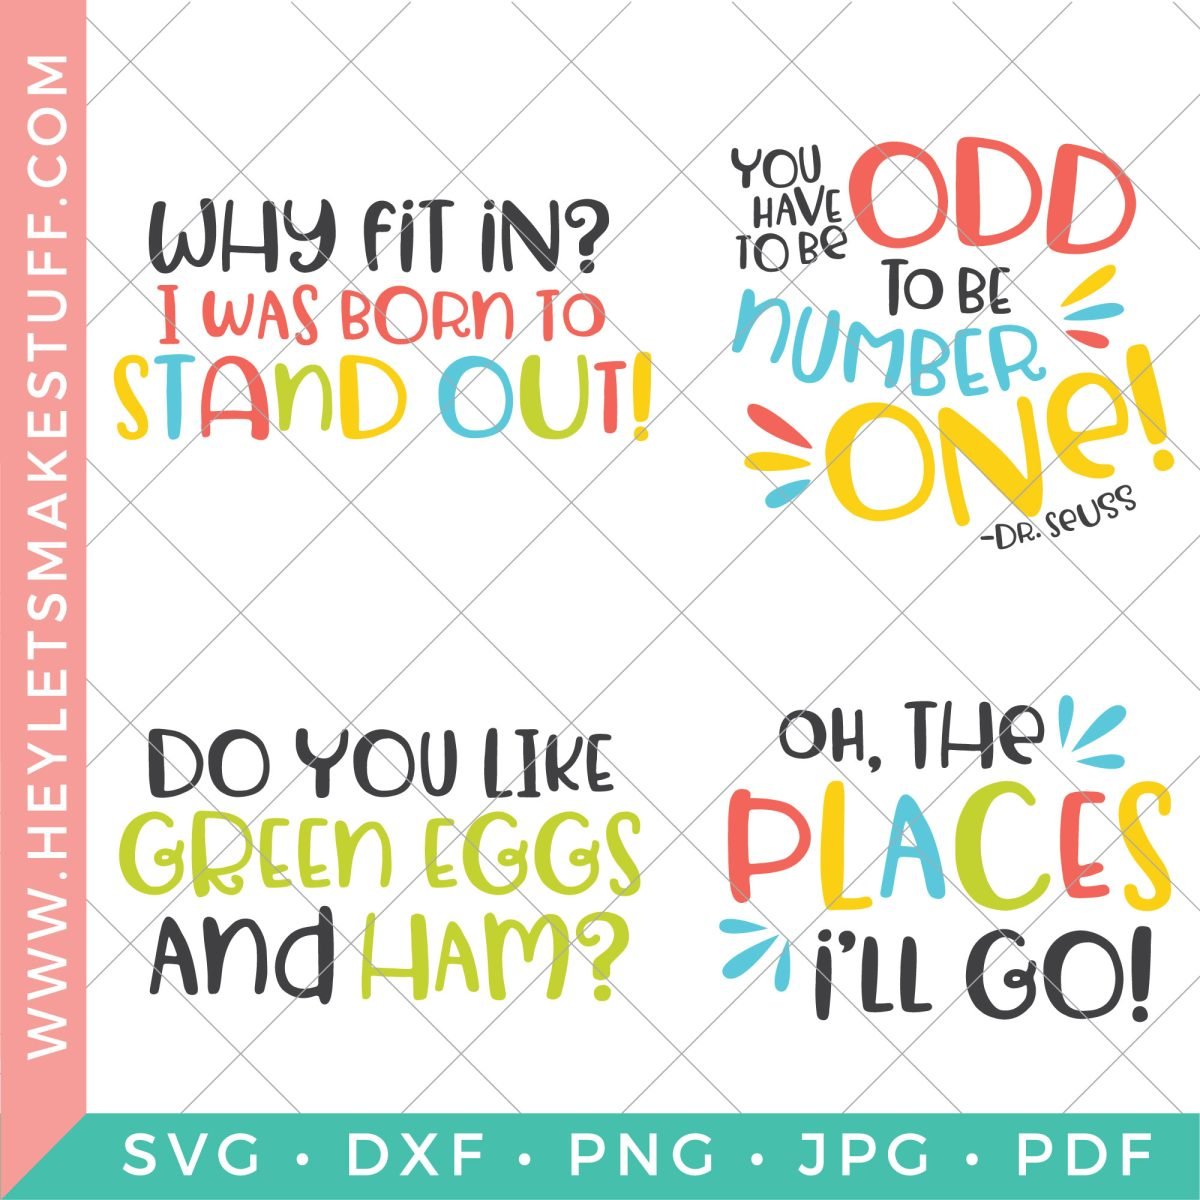 Four SVG files in this bundle: "Why fit in? I was born to stand out!" "You have to be odd to be number one!" "Do you like green eggs and ham?" "Oh the places you'll go!"